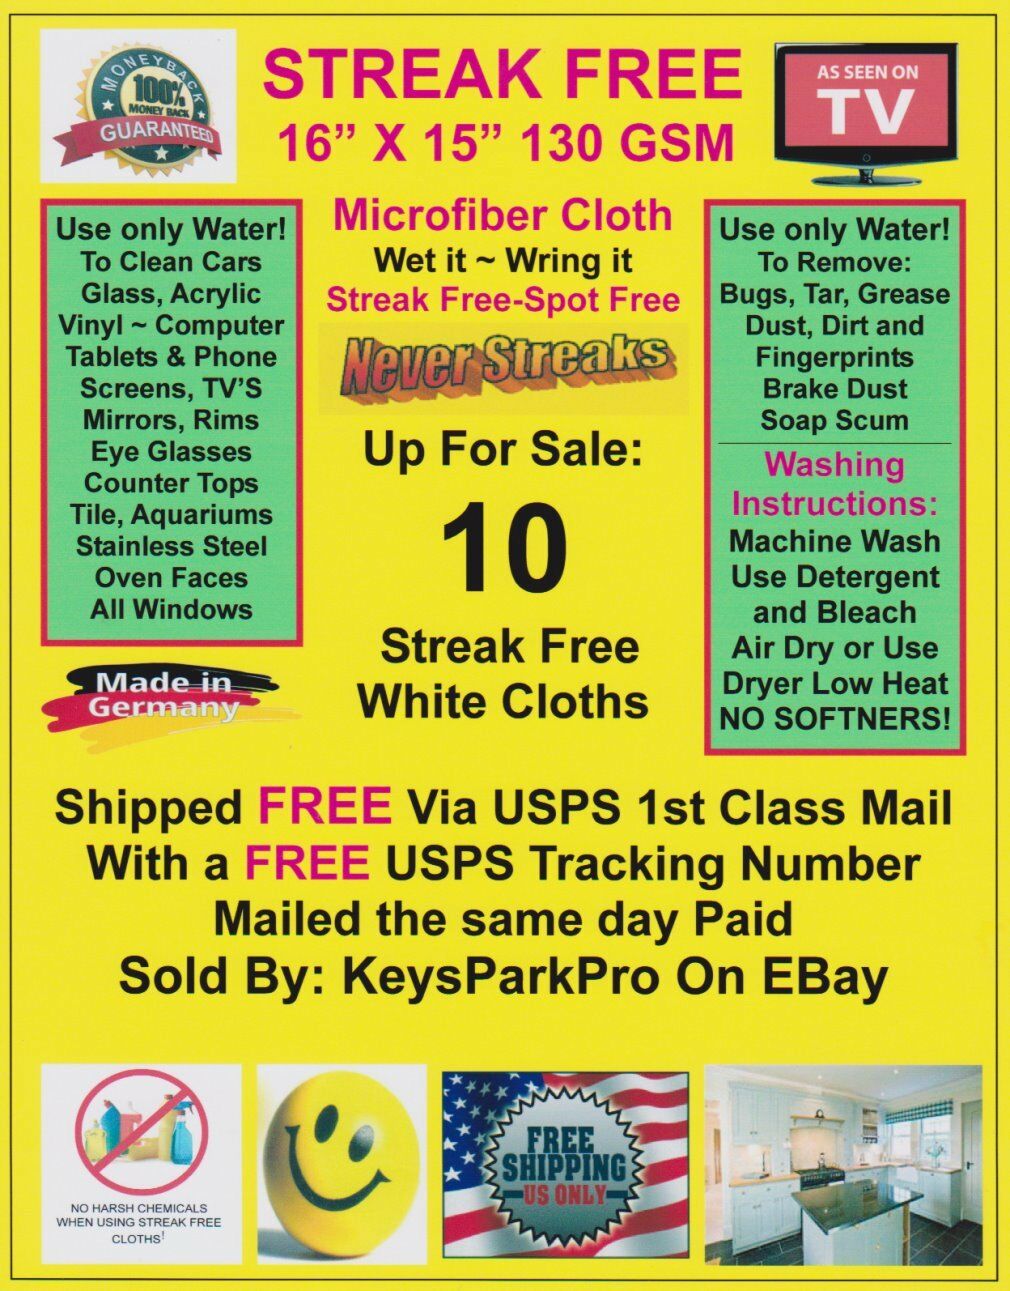 10 Streak Free Microfiber Cleaning Cloths Free! 1st Class Mail Made In Germany!